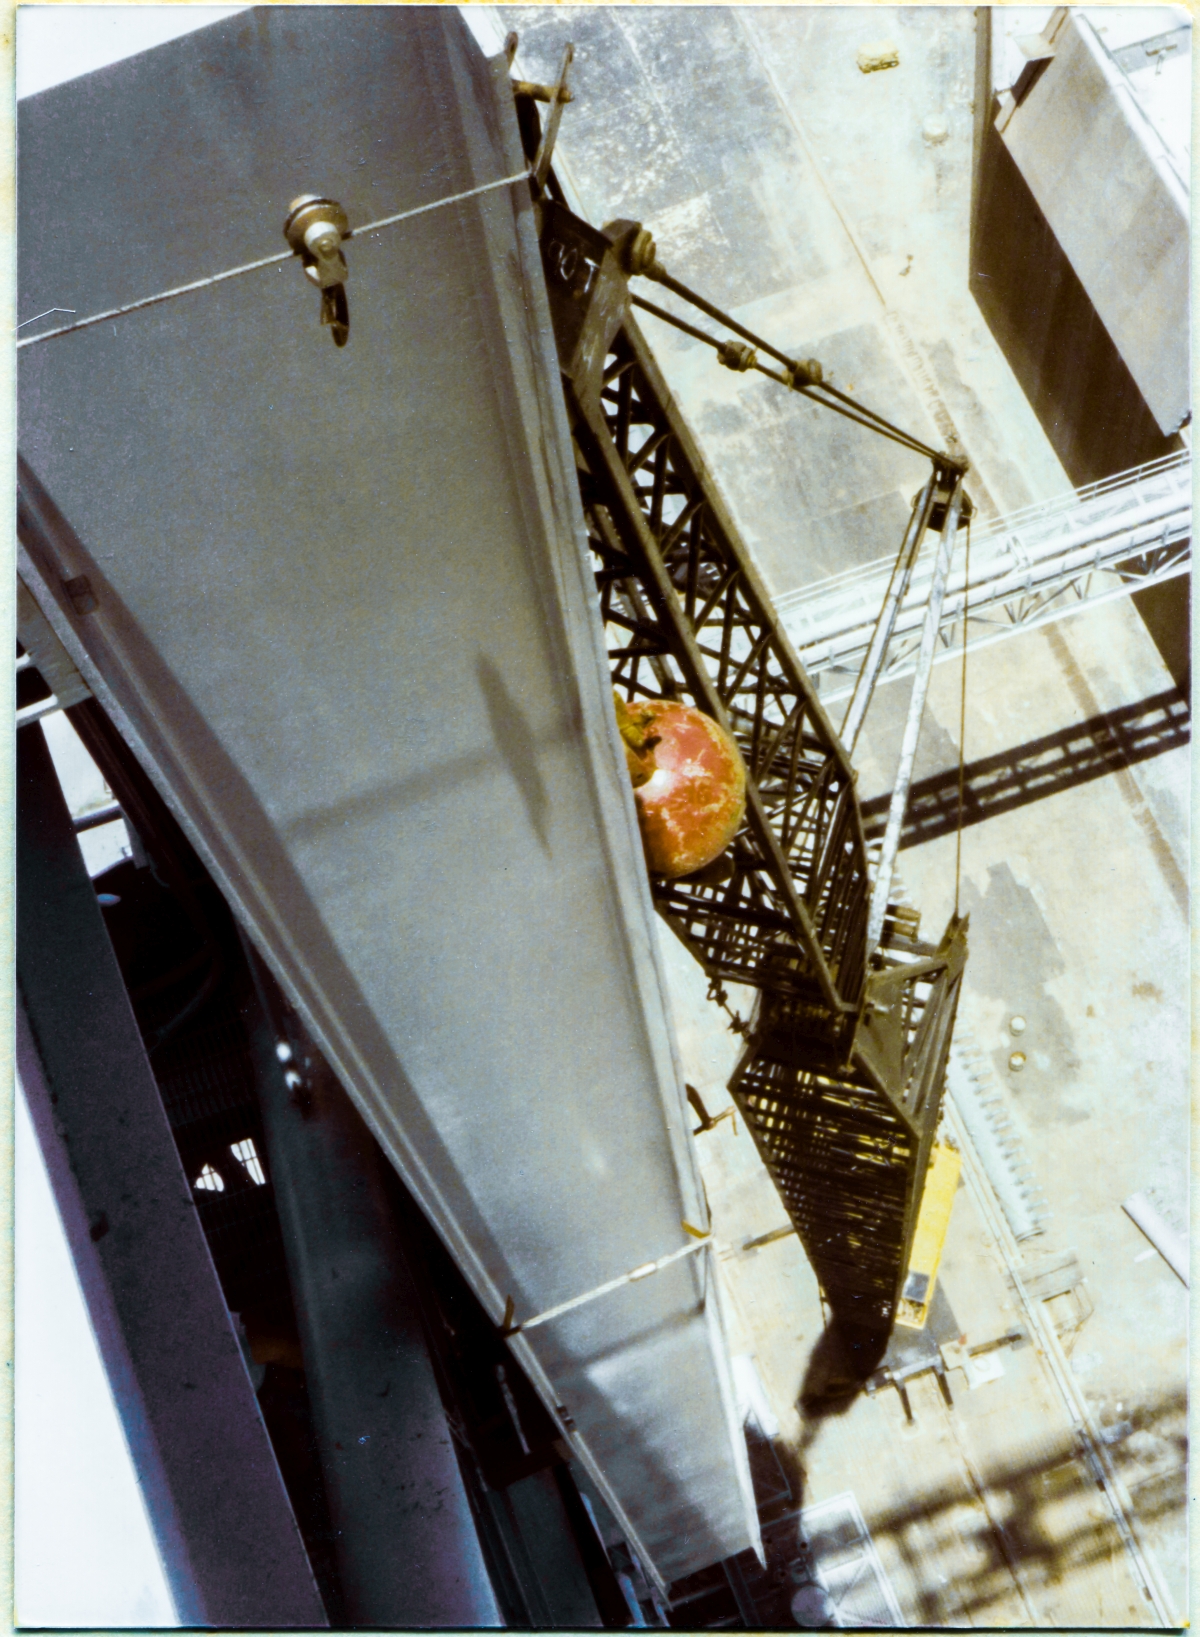 Image 085. You are on top of the Fixed Service Structure, 300 feet above the bottom of the Flame Trench at Space Shuttle Launch Complex 39-B, Kennedy Space Center, Florida, on the boom of the Hammerhead Crane, which projects outward to the east of the main body of the FSS. You are looking down the length of the web of one of the two 40-foot-long W24x104's which make up the main body of the GOX Arm Hinges Support Strongback, which is in suspension, held up by the yellow crane which you see a small part of, including the operator through his cab window, far beneath you sitting on the Pad Deck at the bottom end of a black boom which is almost 250 feet tall. High-summer midday shadows in Florida point nearly straight down beneath that which is casting them on elements of the world below. In the top right corner of the frame, the East Side Flame Deflector appears as a gray rectangle above the fifty-foot-high darkness of the East Flame Trench Wall. Immediately below it, the pale steel of the North Piping Bridge spans the Flame Trench, casting its latticework shadow on the refractory bricks that line its bottom surface. In the bottom right of the frame, the softer latticework shadow of the Hammerhead Crane, much farther above, which you are standing on, extends across the Crawlerway surface of the Pad Deck, to and beyond the invisible five-story precipice of the West Wall of the Flame Trench which is betrayed only by the very slight offset in the shadow, near the right margin of the frame. Your own shadow is in-frame, but unseeable, dwarfed into invisibility by the imagination-beggaring scale of that which you are a part of. You are, if only temporarily, part of an Ironworker's World, and it is a world apart, like no other. Anywhere. Photo by James MacLaren.